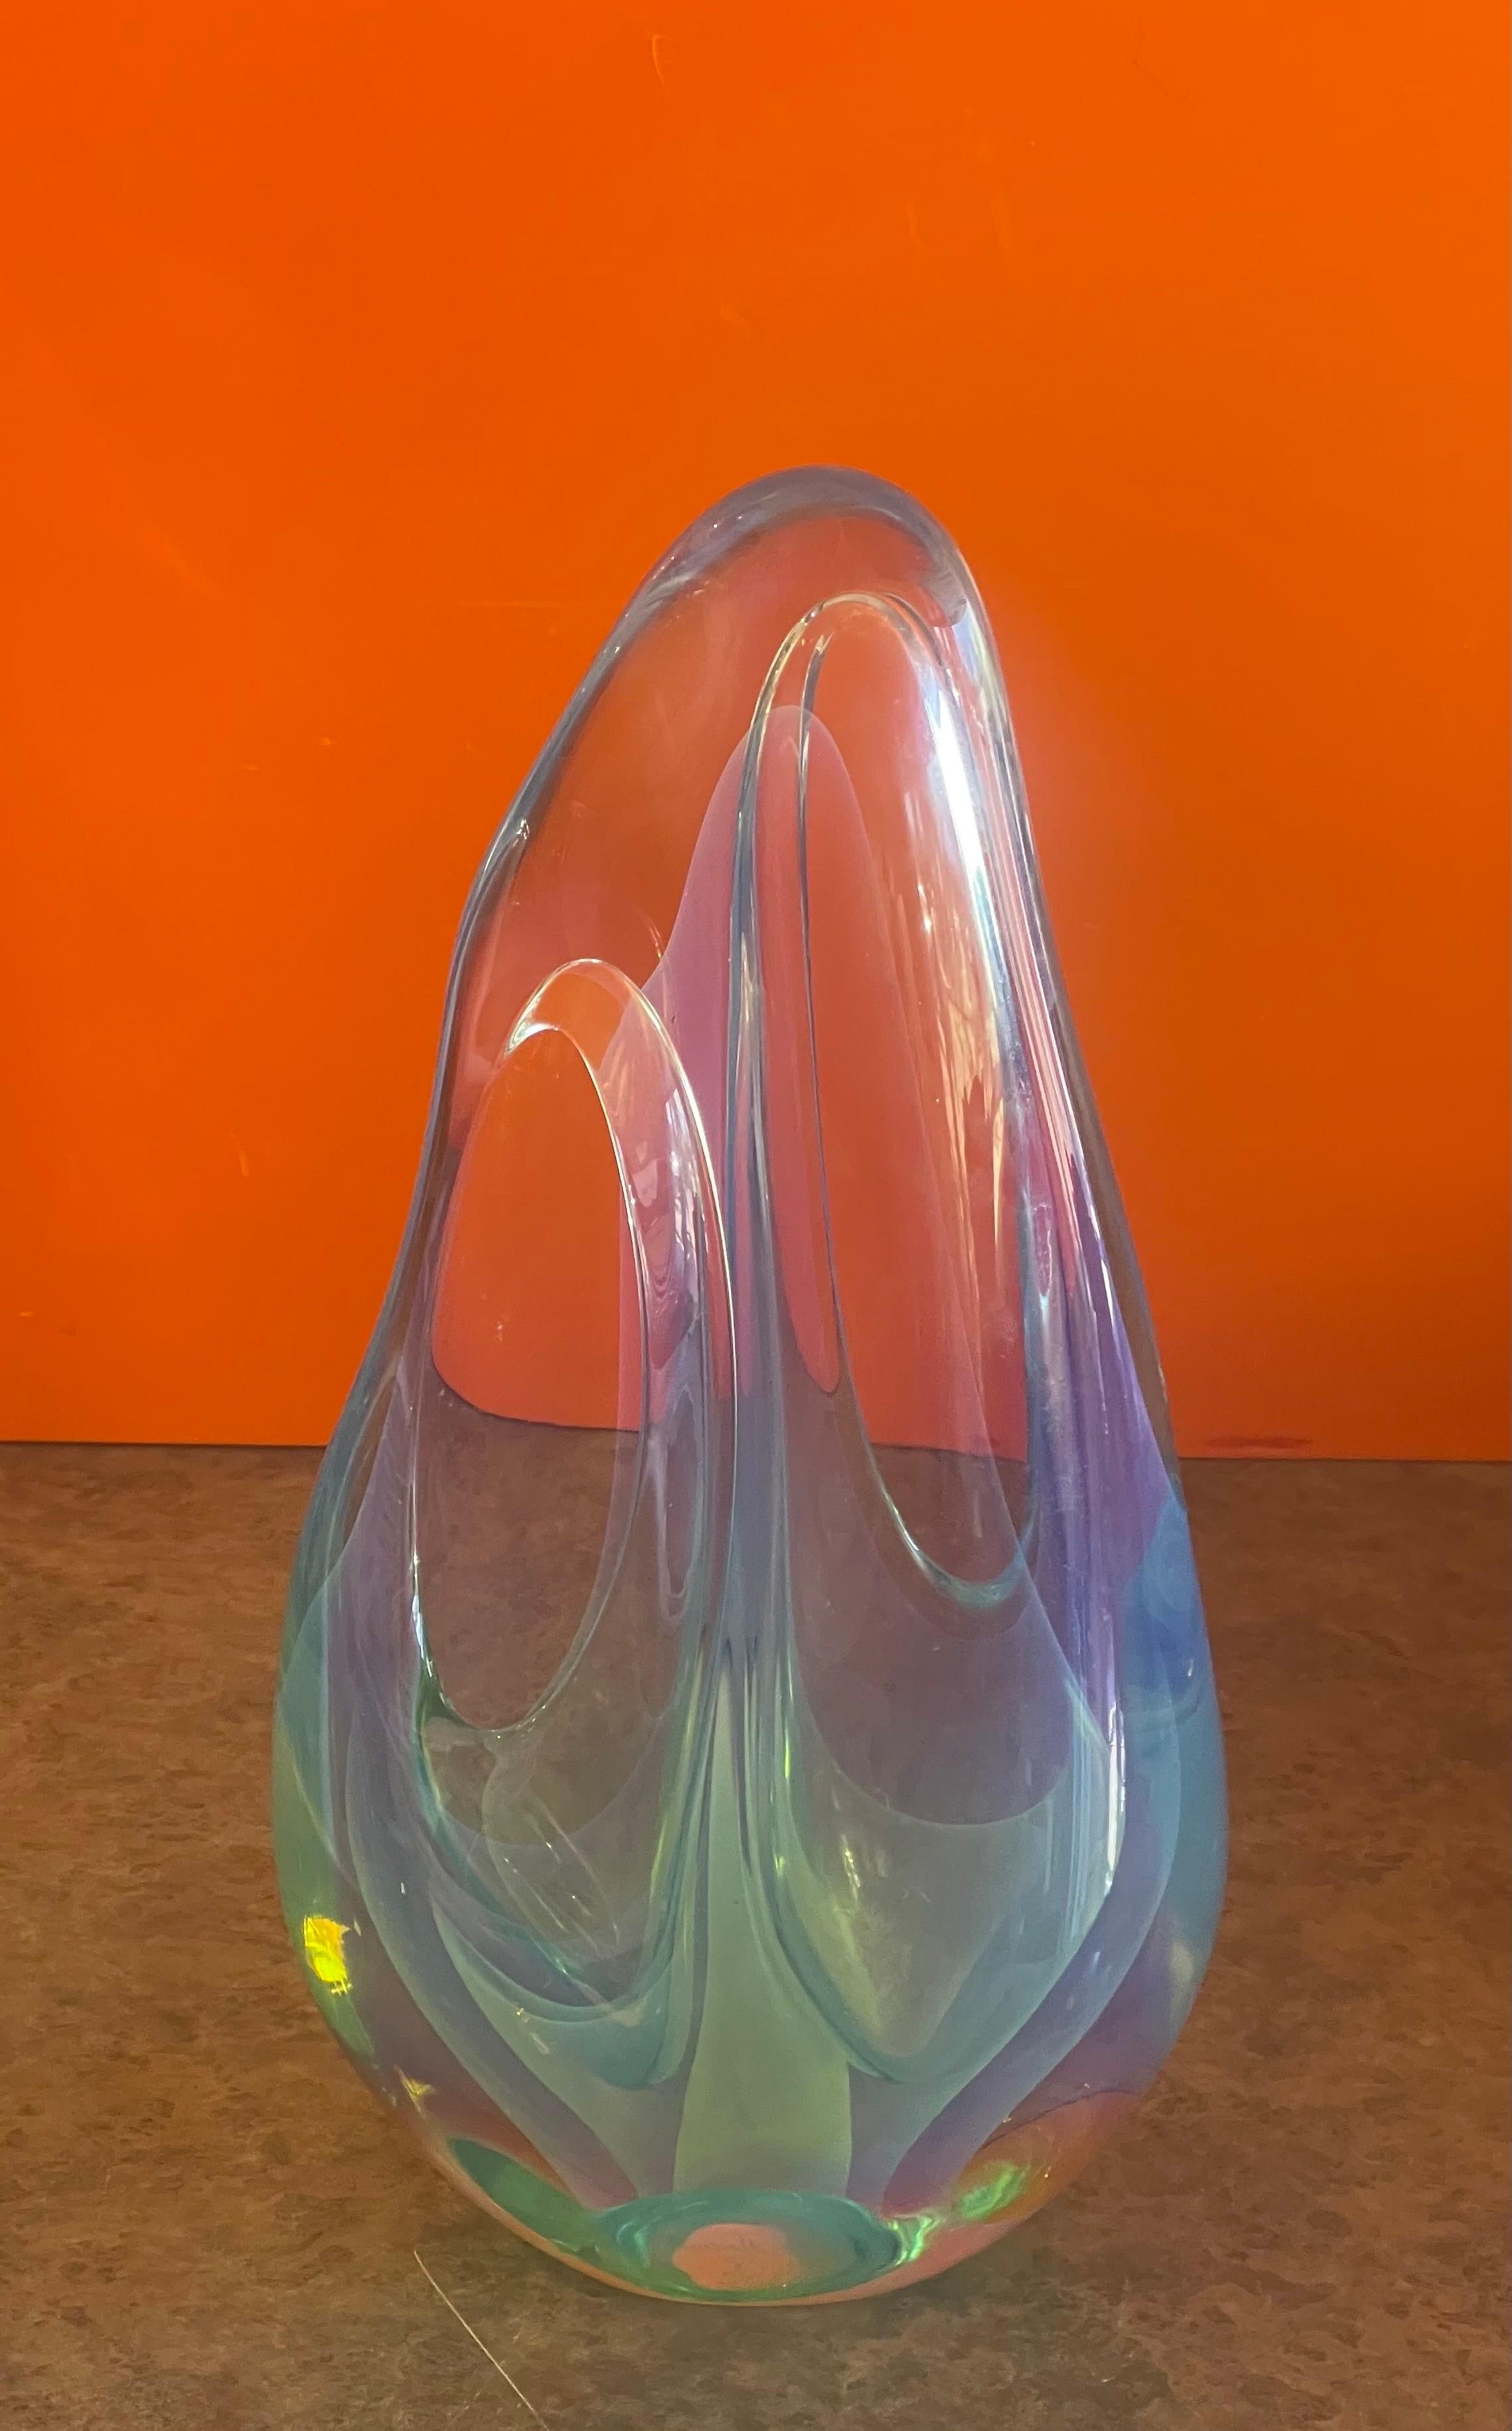 An absolutely stunning bluish opalescence tear drop art glass sculpture by Charles Wright, circa 1980. It is a beautiful iconic example of Wright's work with great color and clarity; this piece is absolutely exquisite and the digital images in the